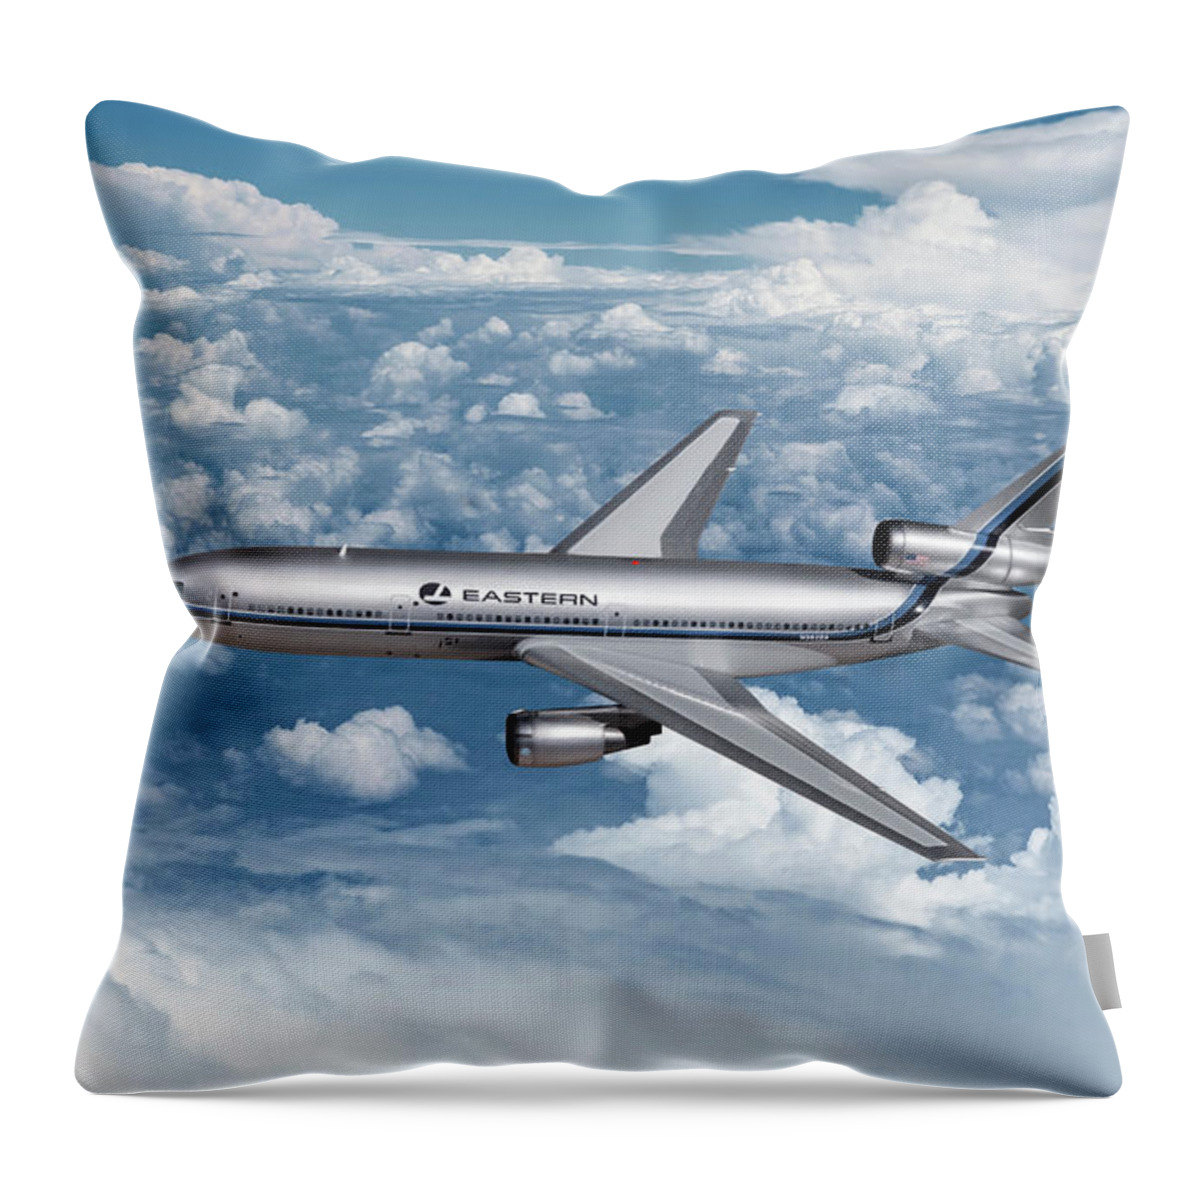 Eastern Airlines Throw Pillow featuring the digital art Eastern Airlines DC-10-30 by Erik Simonsen